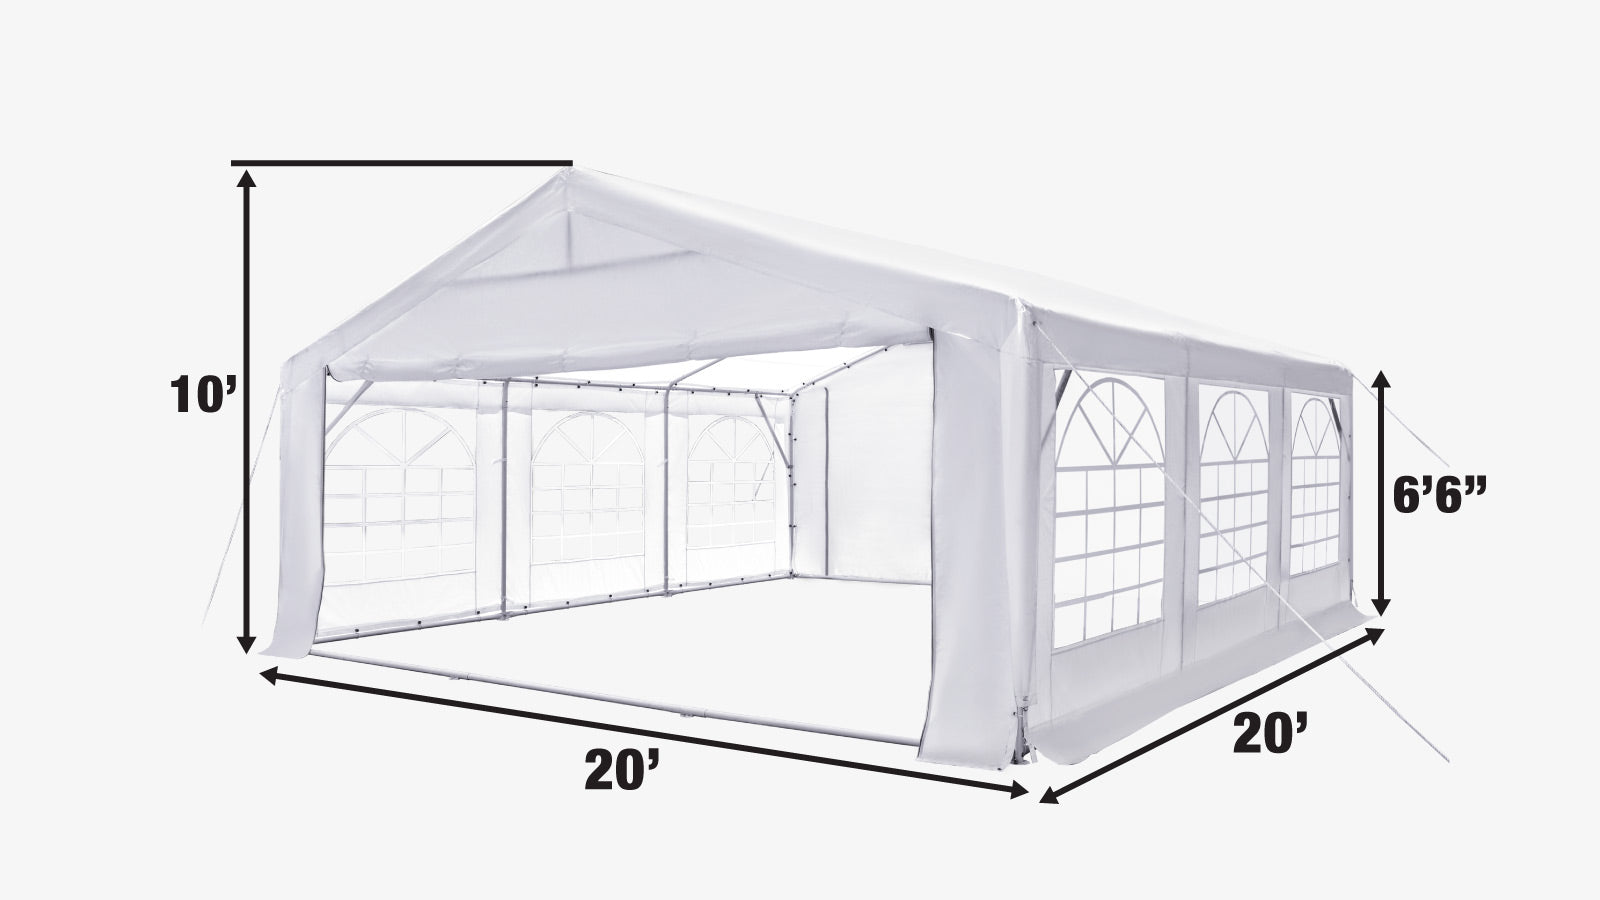 TMG Industrial 20' x 20' Heavy Duty Outdoor Party Tent with Removable Sidewalls and Roll-Up Doors, PE tarpaulin fabric, 6’6” Overhead, 10’ Peak Ceiling, TMG-PT2020F-specifications-image